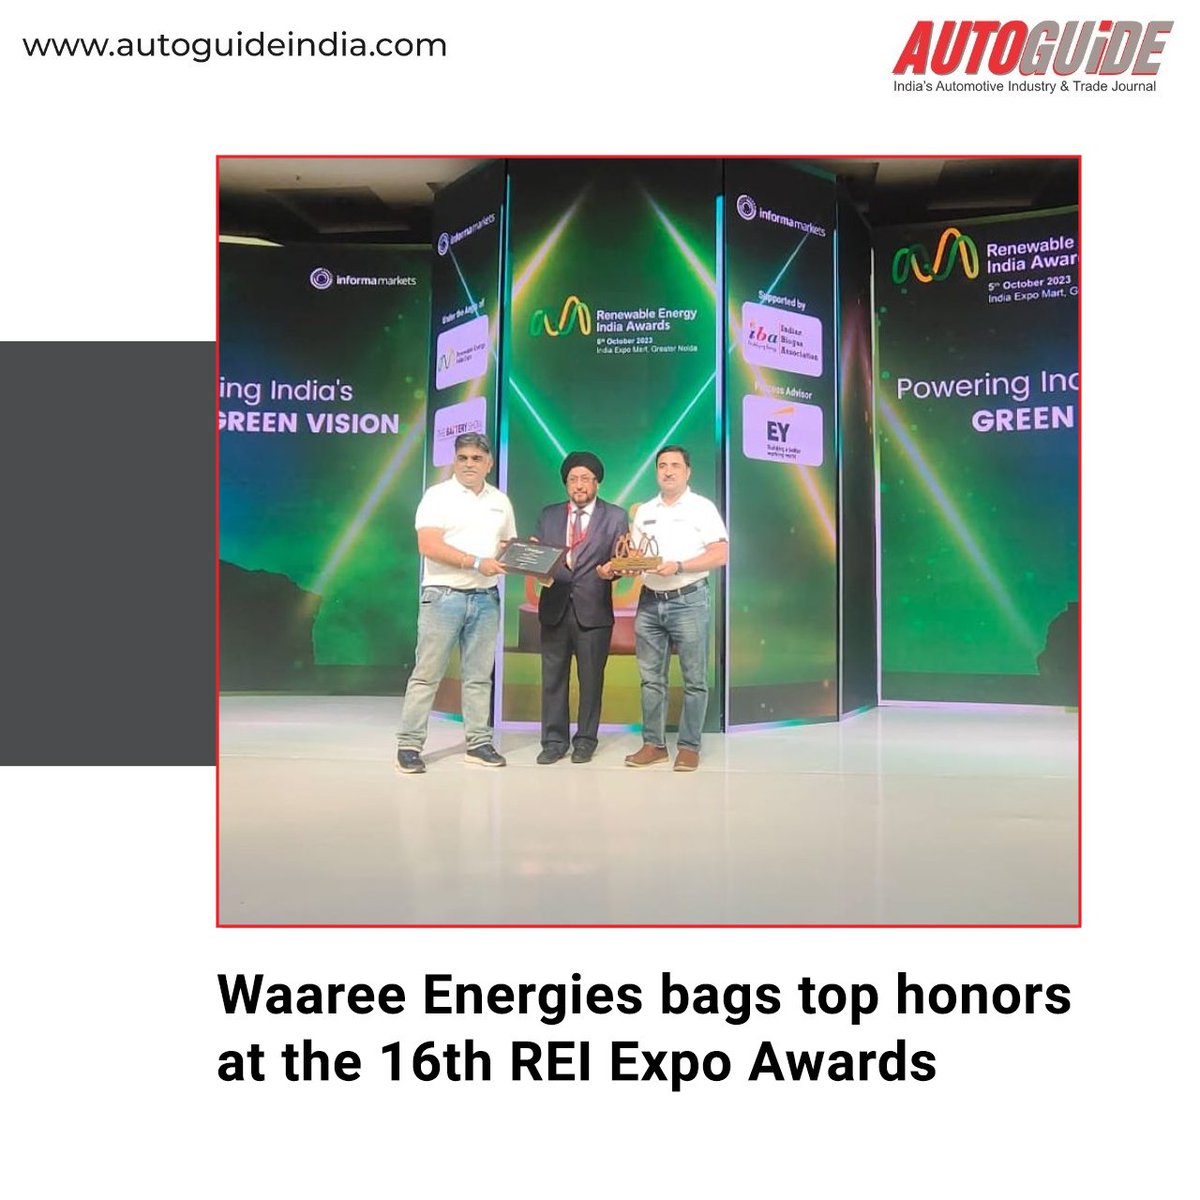 autoguideindia.com/awards-milesto…
The company has been awarded both the 'REI Company of the Year' and the 'REI Jury Recognition Leadership in Solar Manufacturing' Awards.  #WaareeEnergies #REIAward #SolarManufacturing #Award